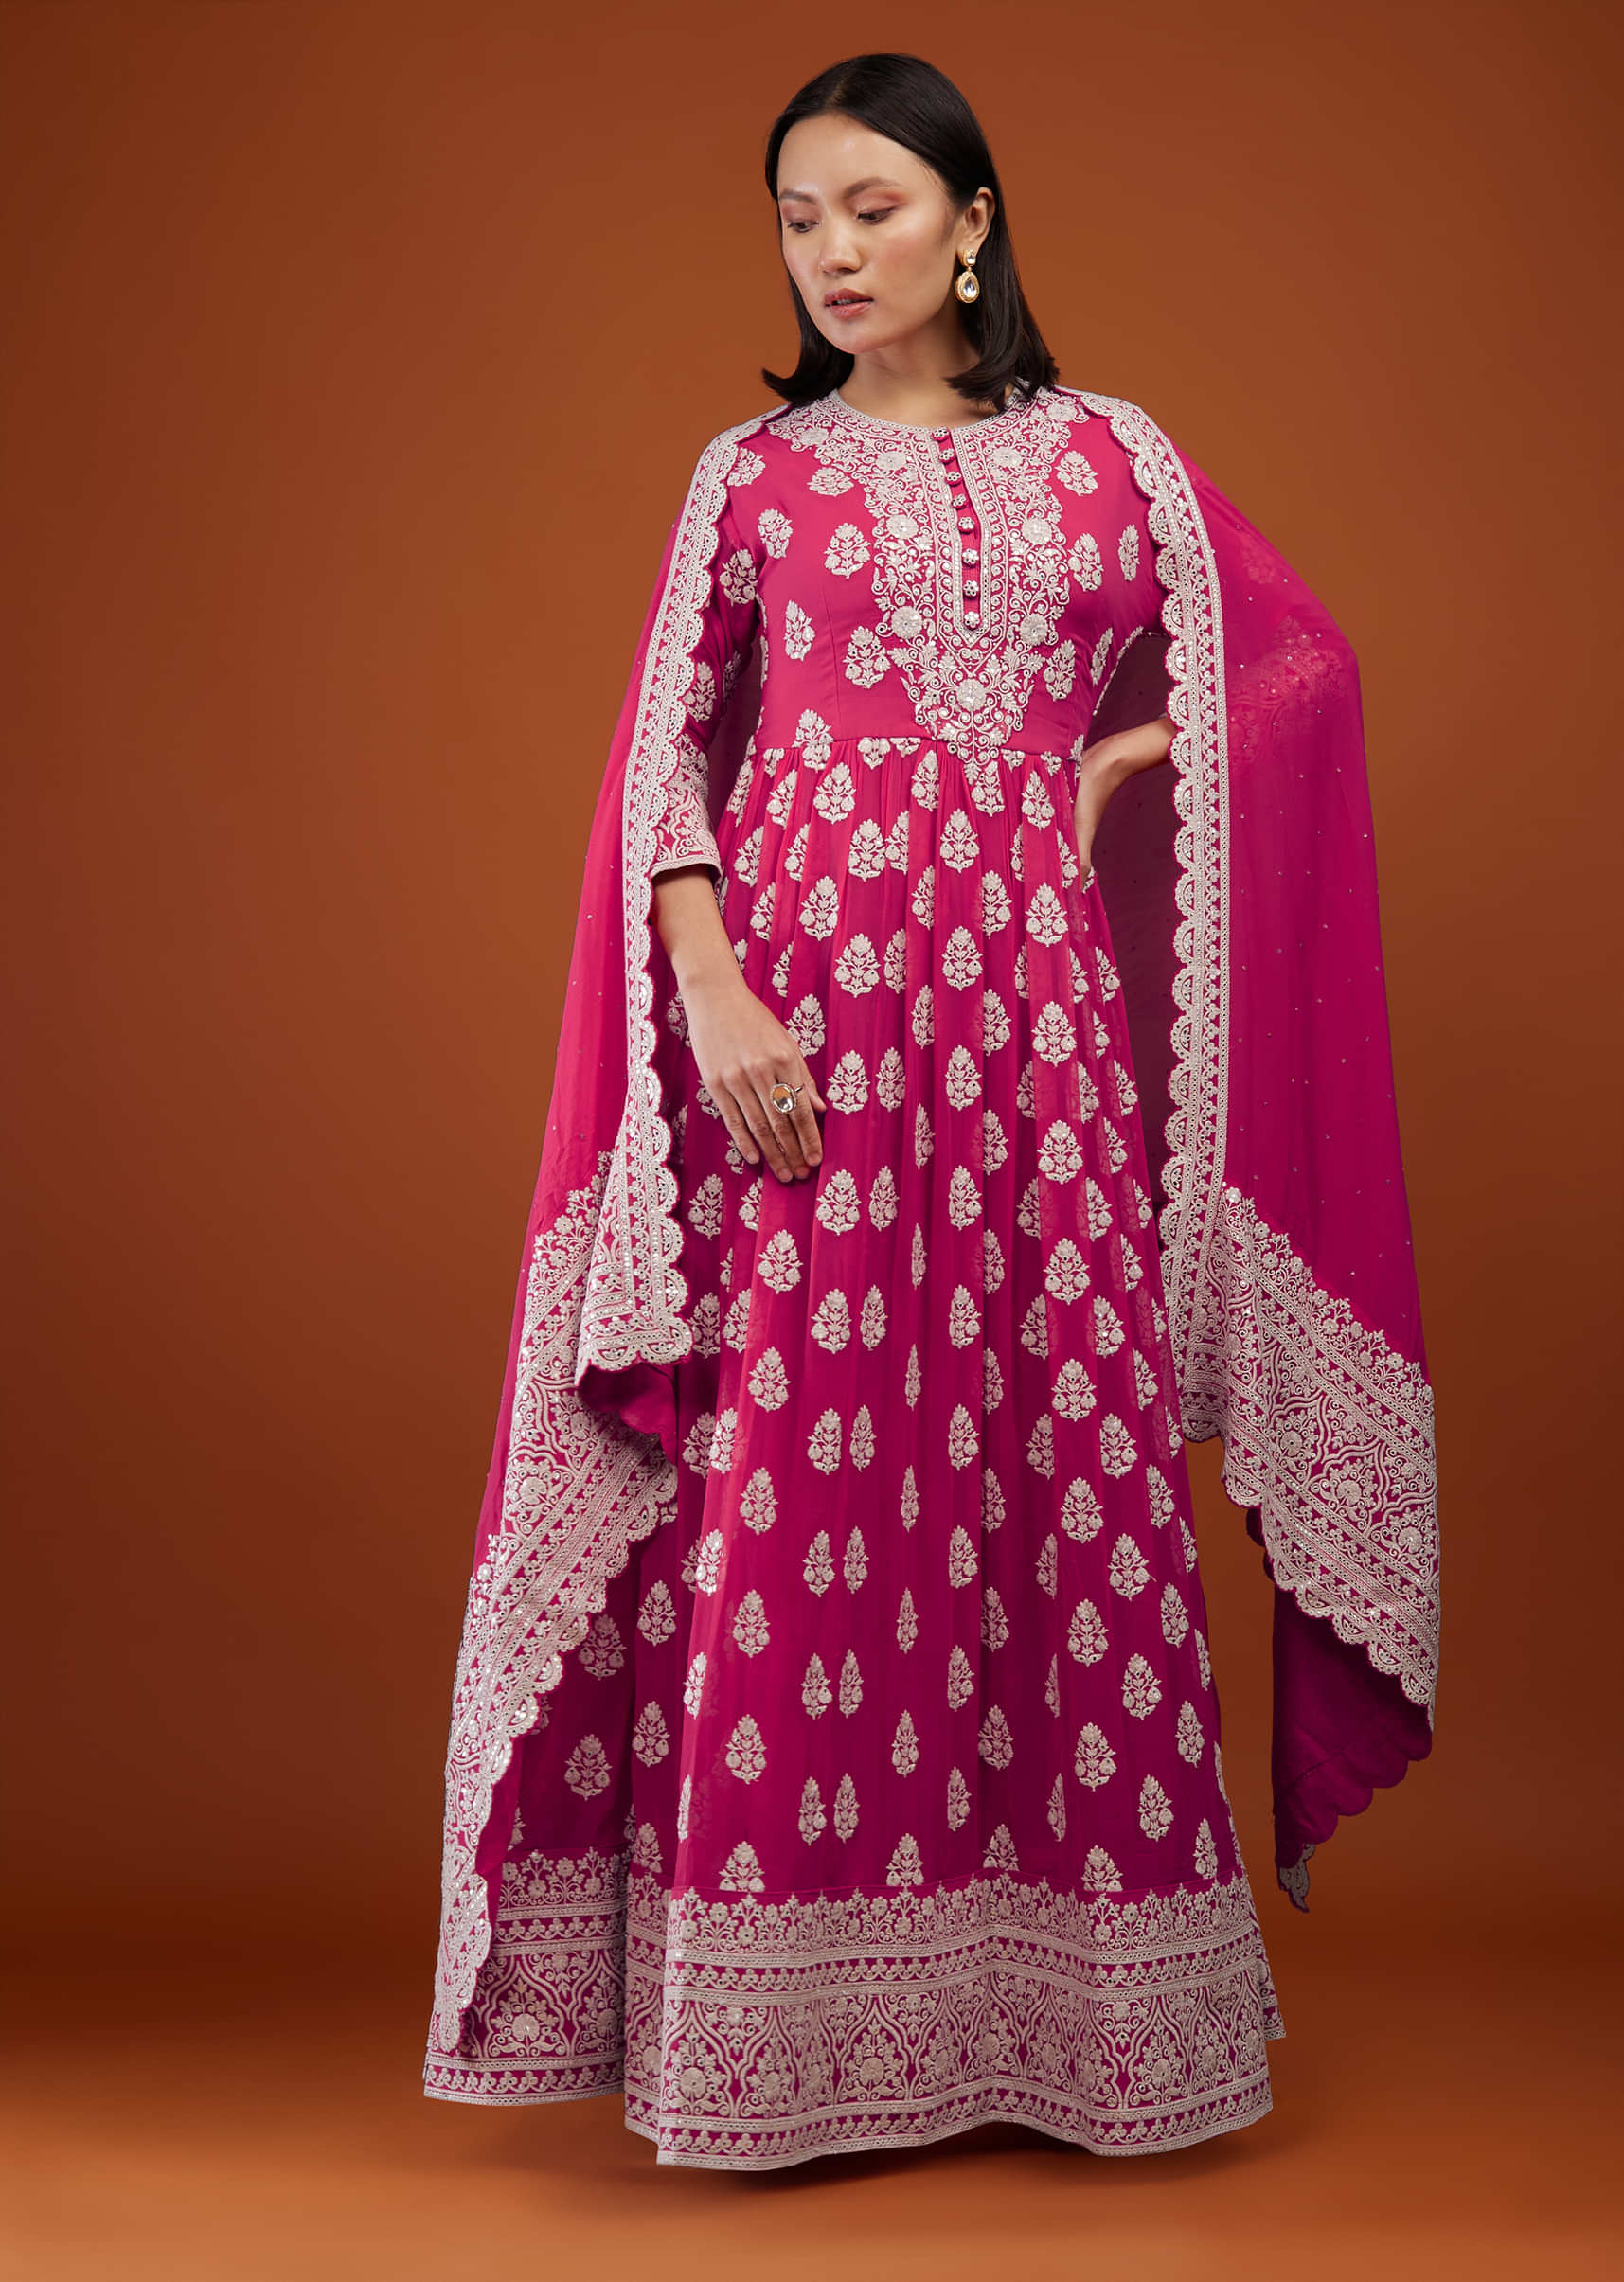 Rasberry Sorbet Pink Embroidered Anarkali Suit In Georgette